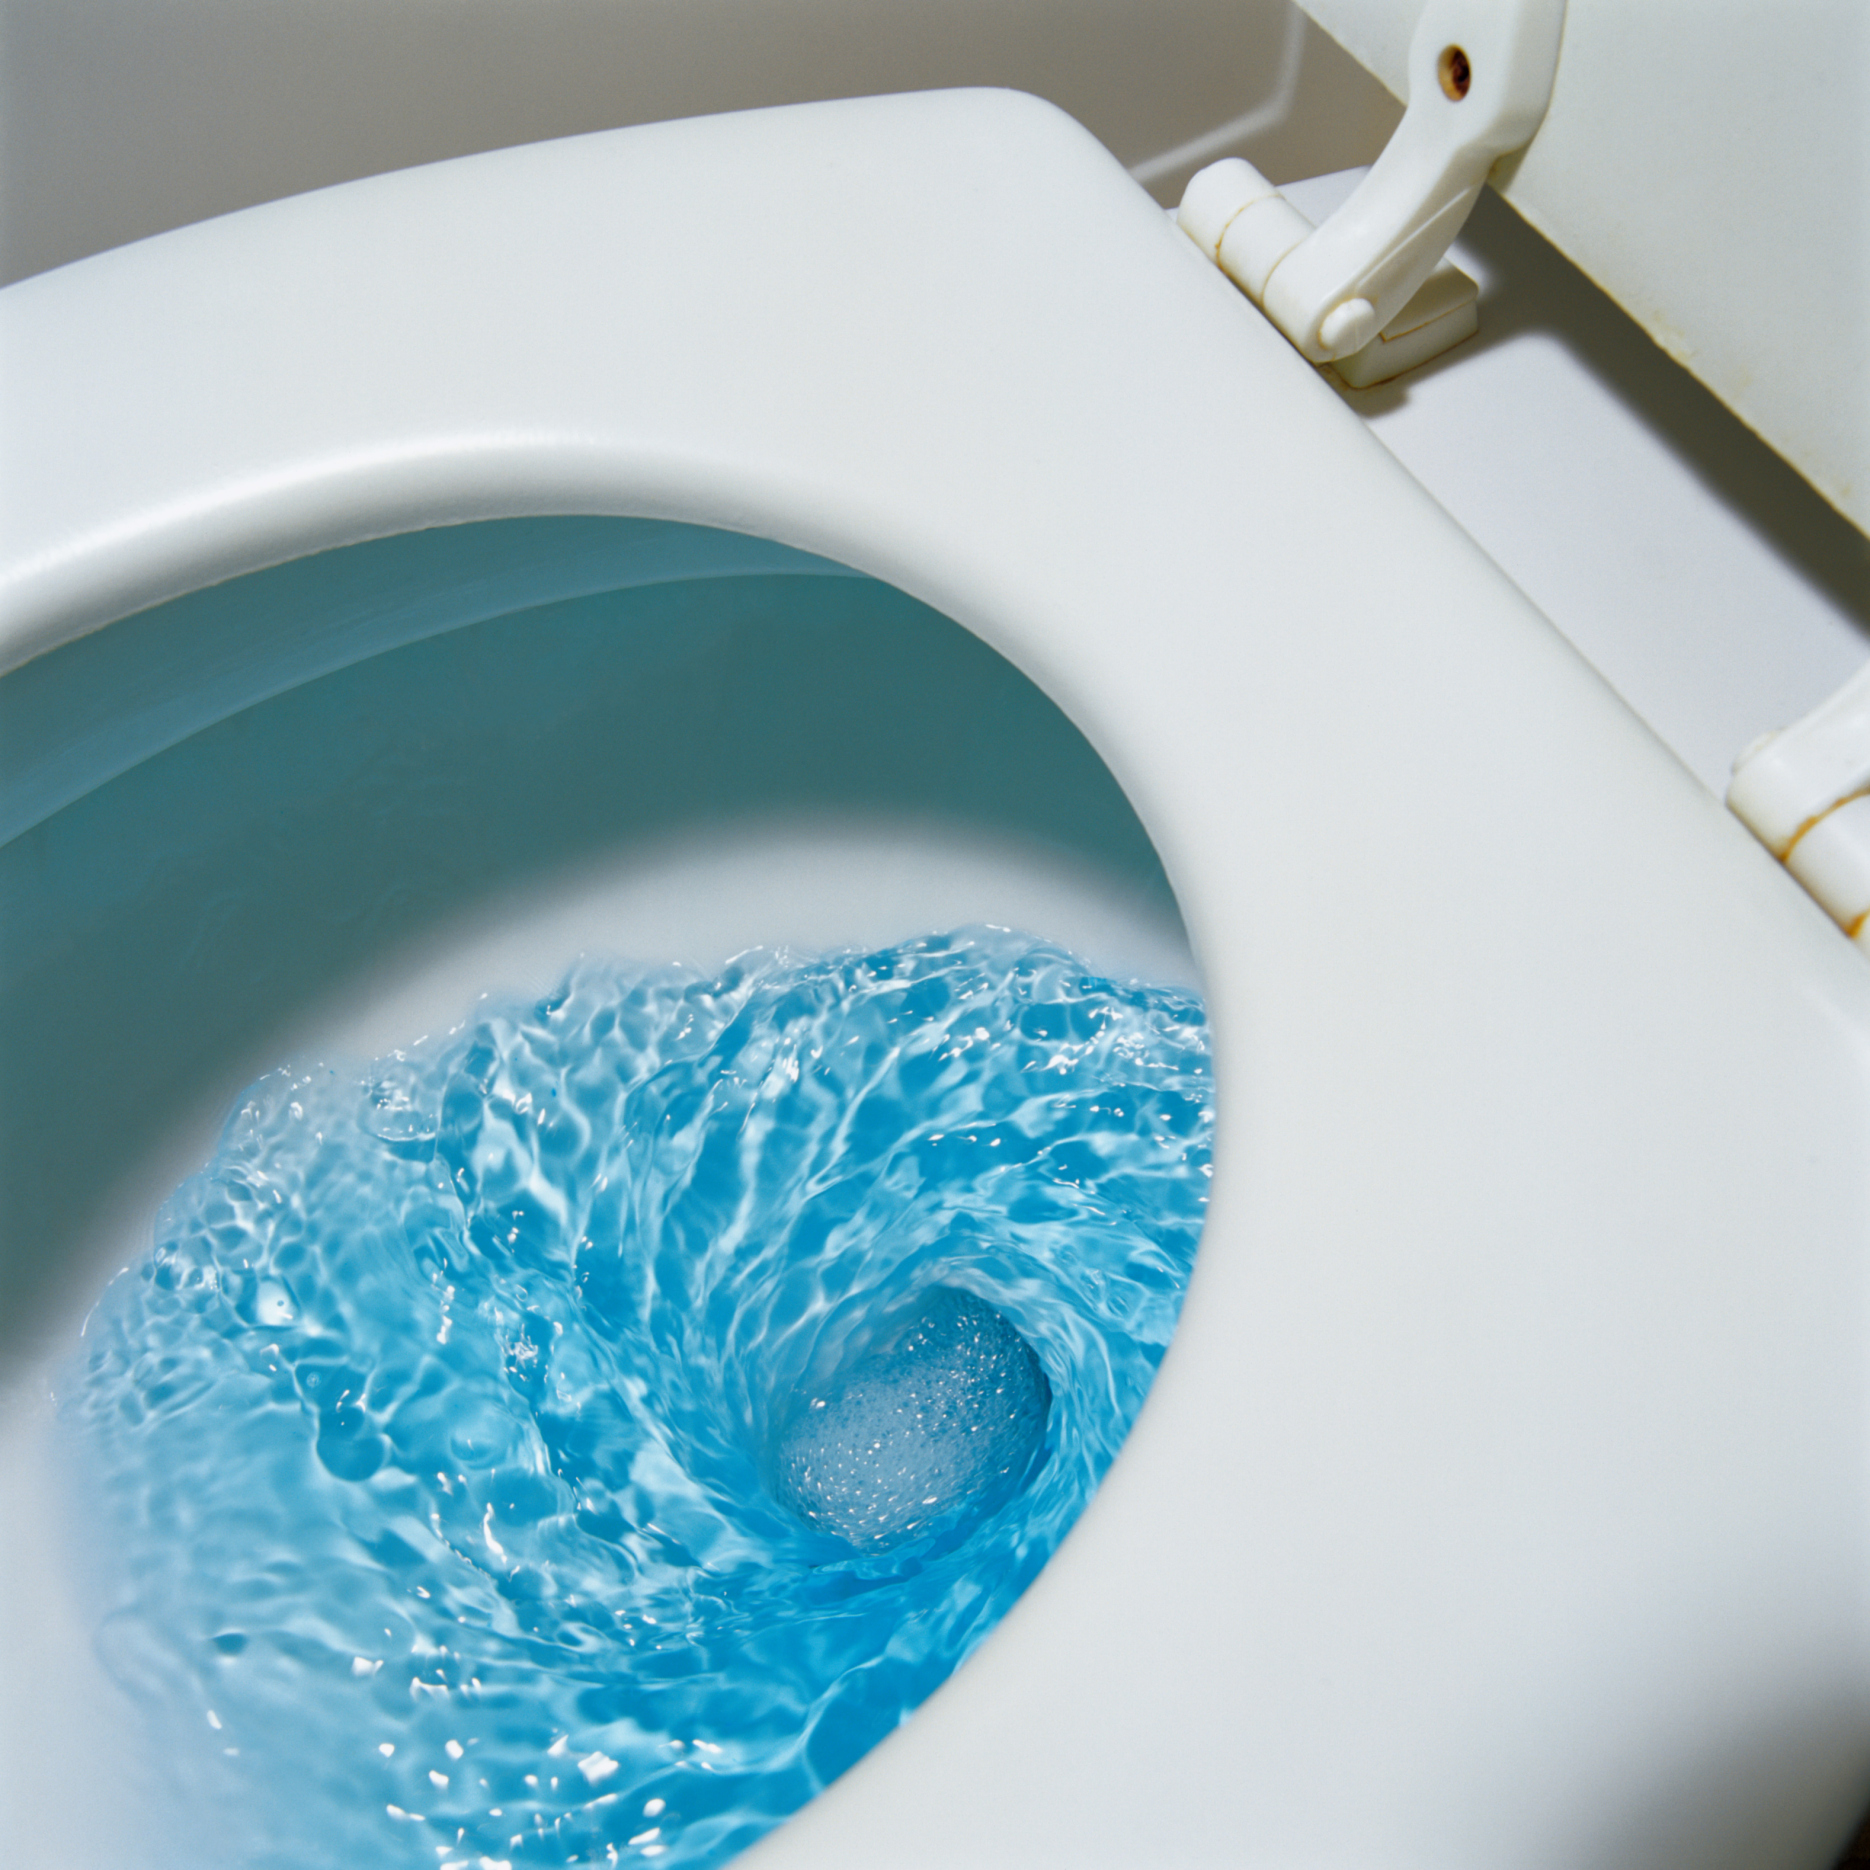 Possible Causes of a Weak Flushing Toilet ehow picture